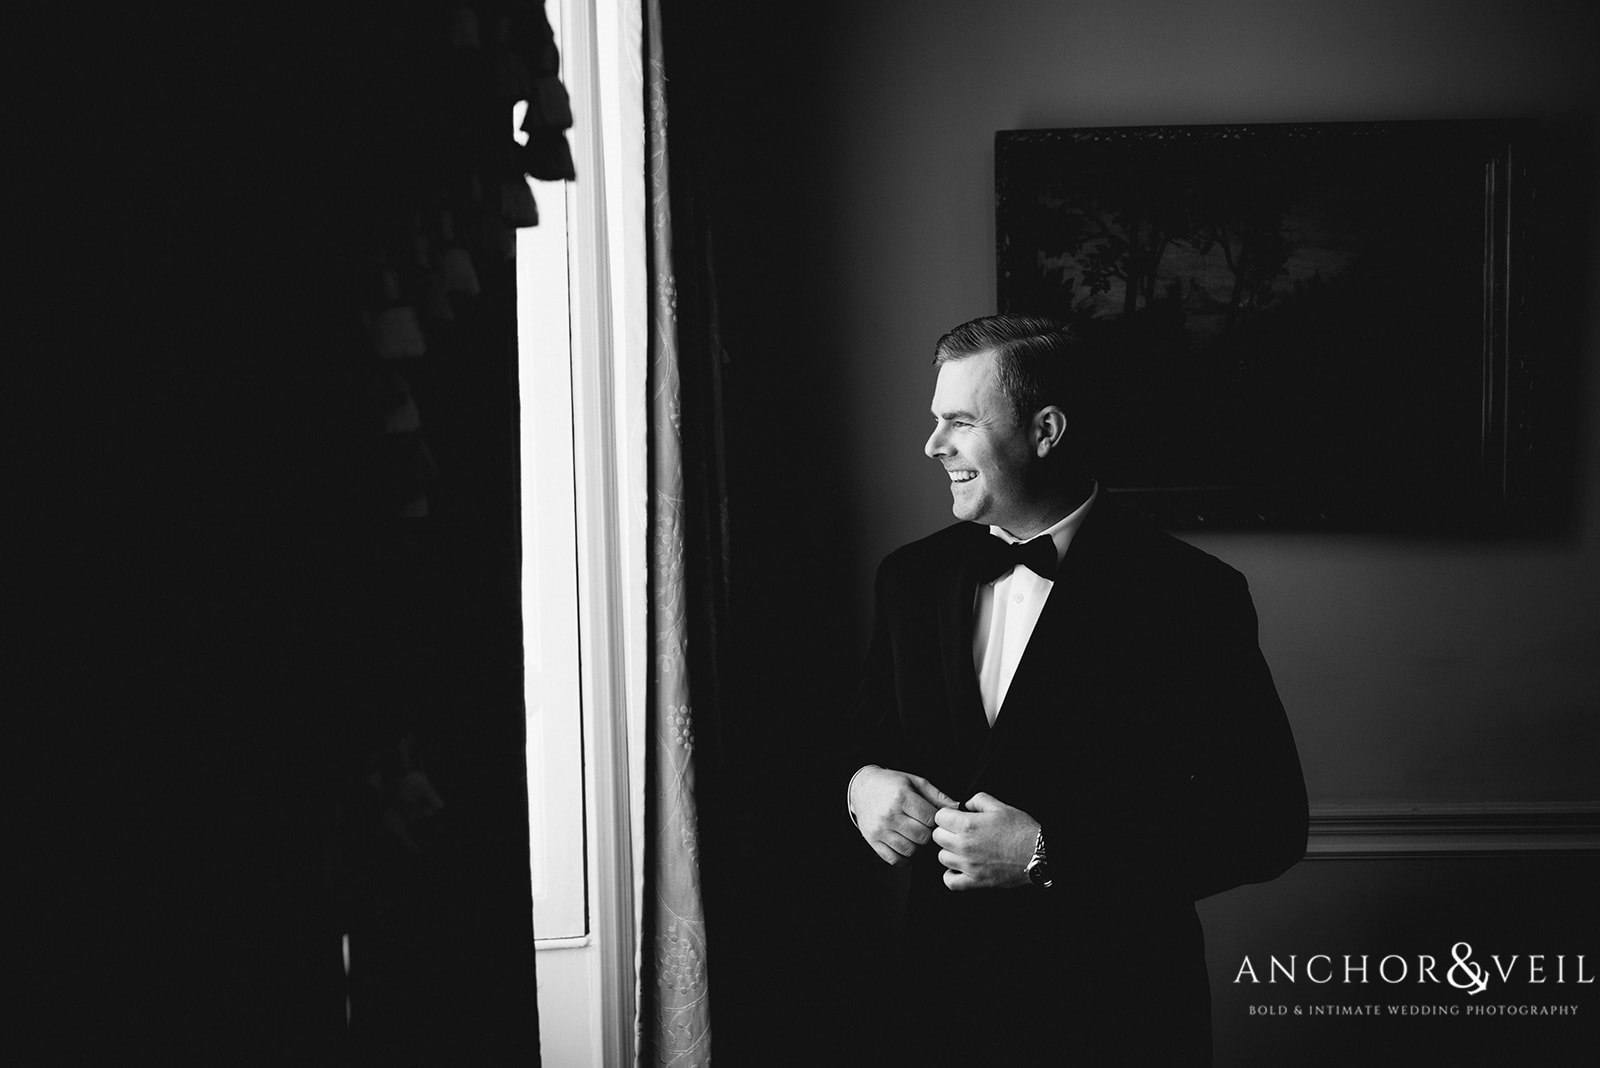 The groom standing at the window at the Lowndes Grove Plantation Wedding